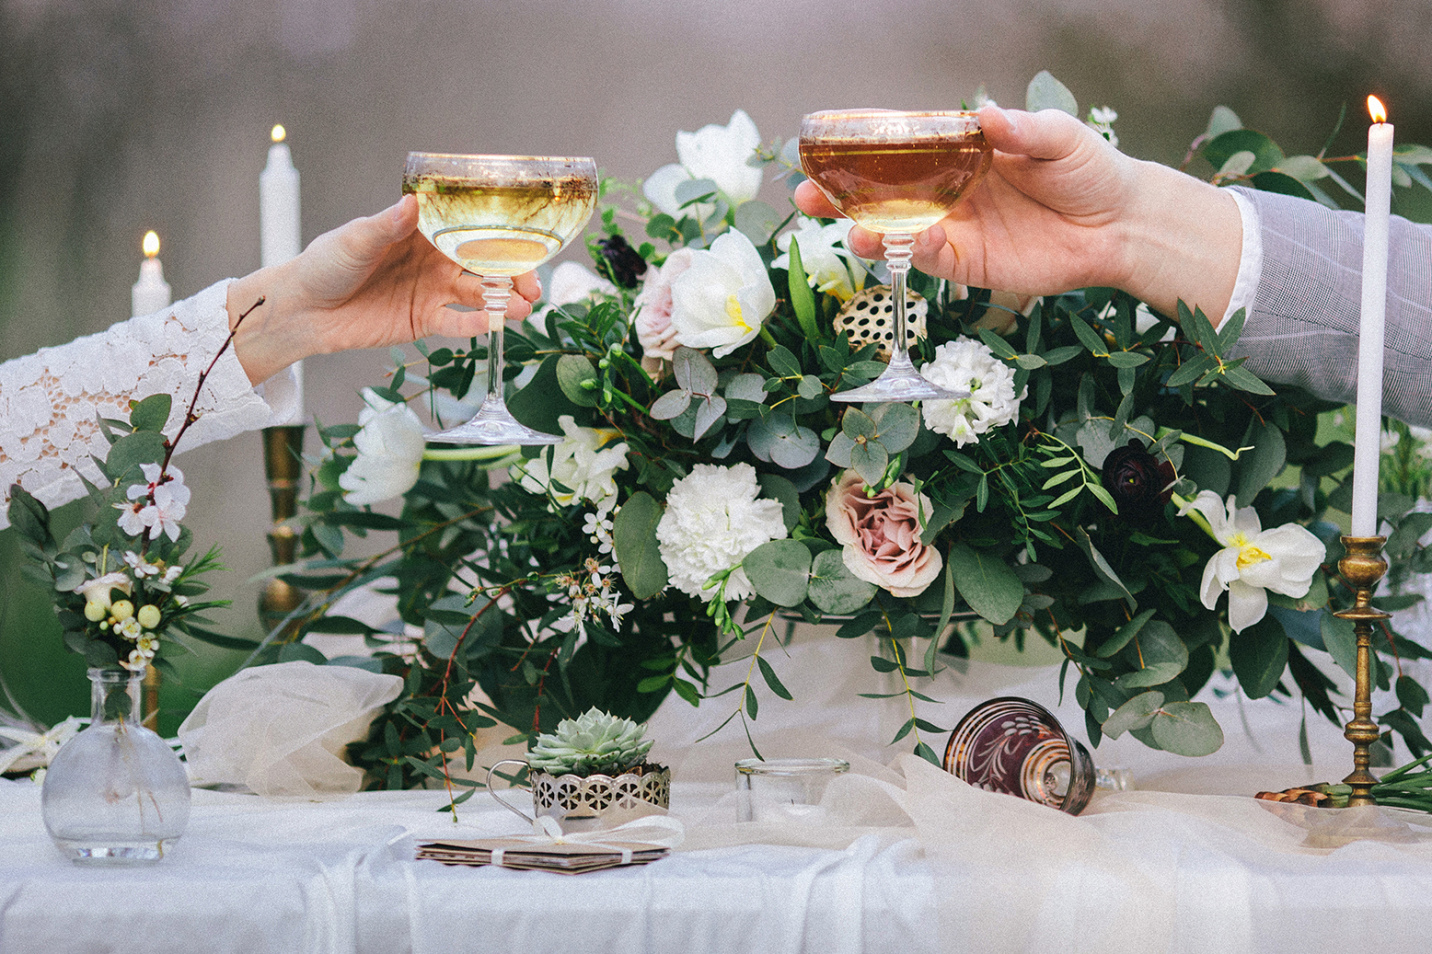 Raising glasses with champagne at the wedding table